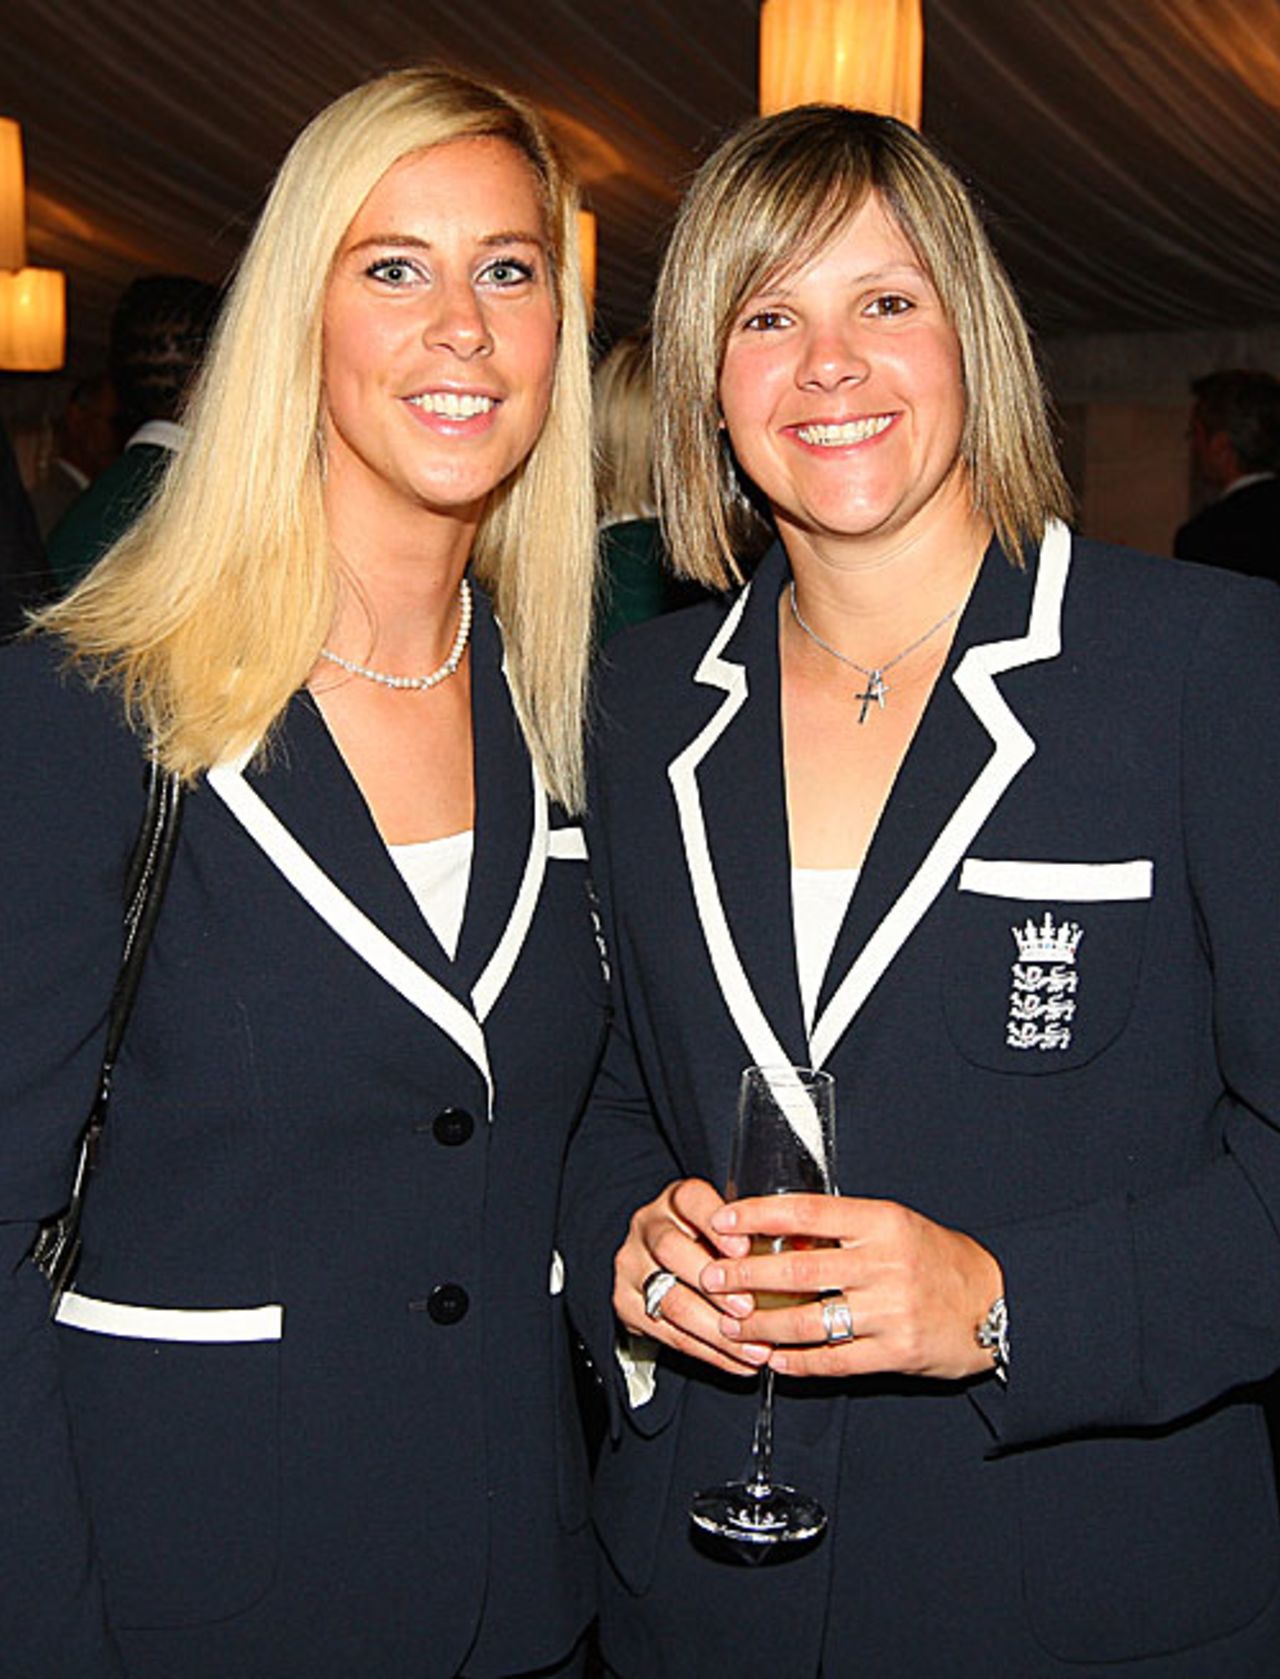 England team manager Megan Smith poses with Nicki Shaw, Sydney, March 4, 2009